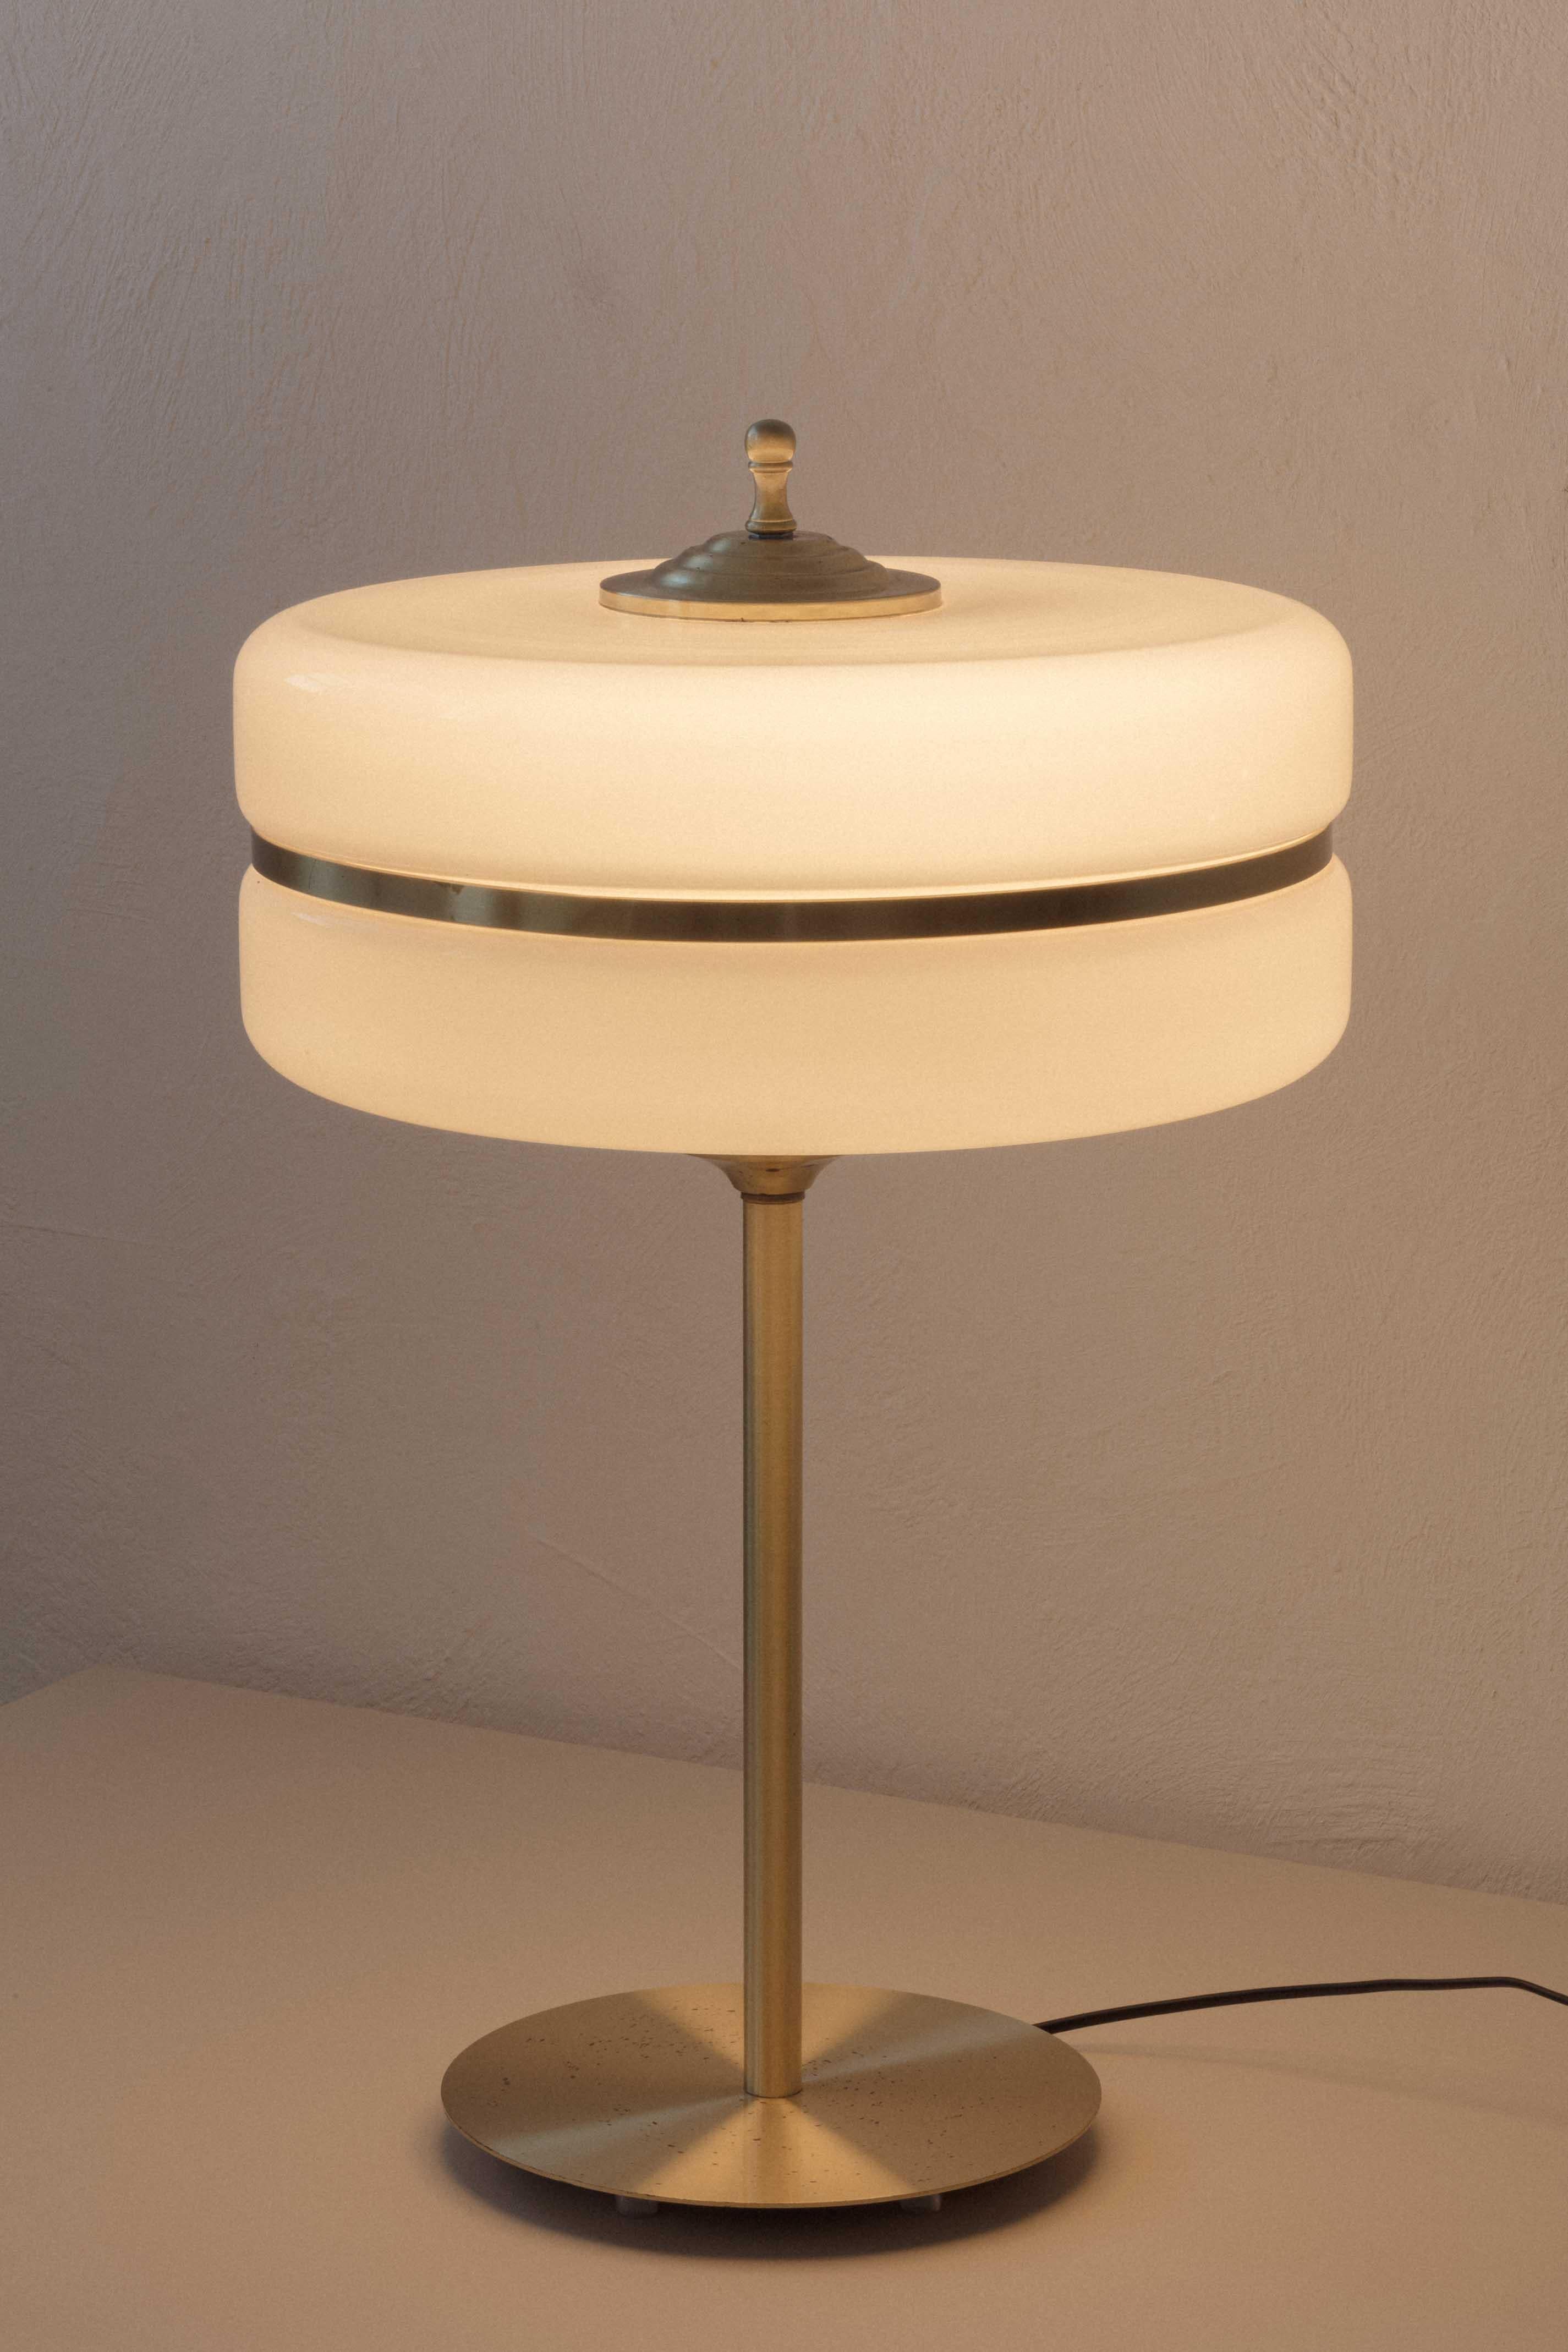 This gorgeous table lamp presents lampshades in glass, the most antique light diffusers. In this piece, the Deco-inspired opal cylindrical from the early 1900s tradition gains a simple and elegant design with brushed bronze structure and details.